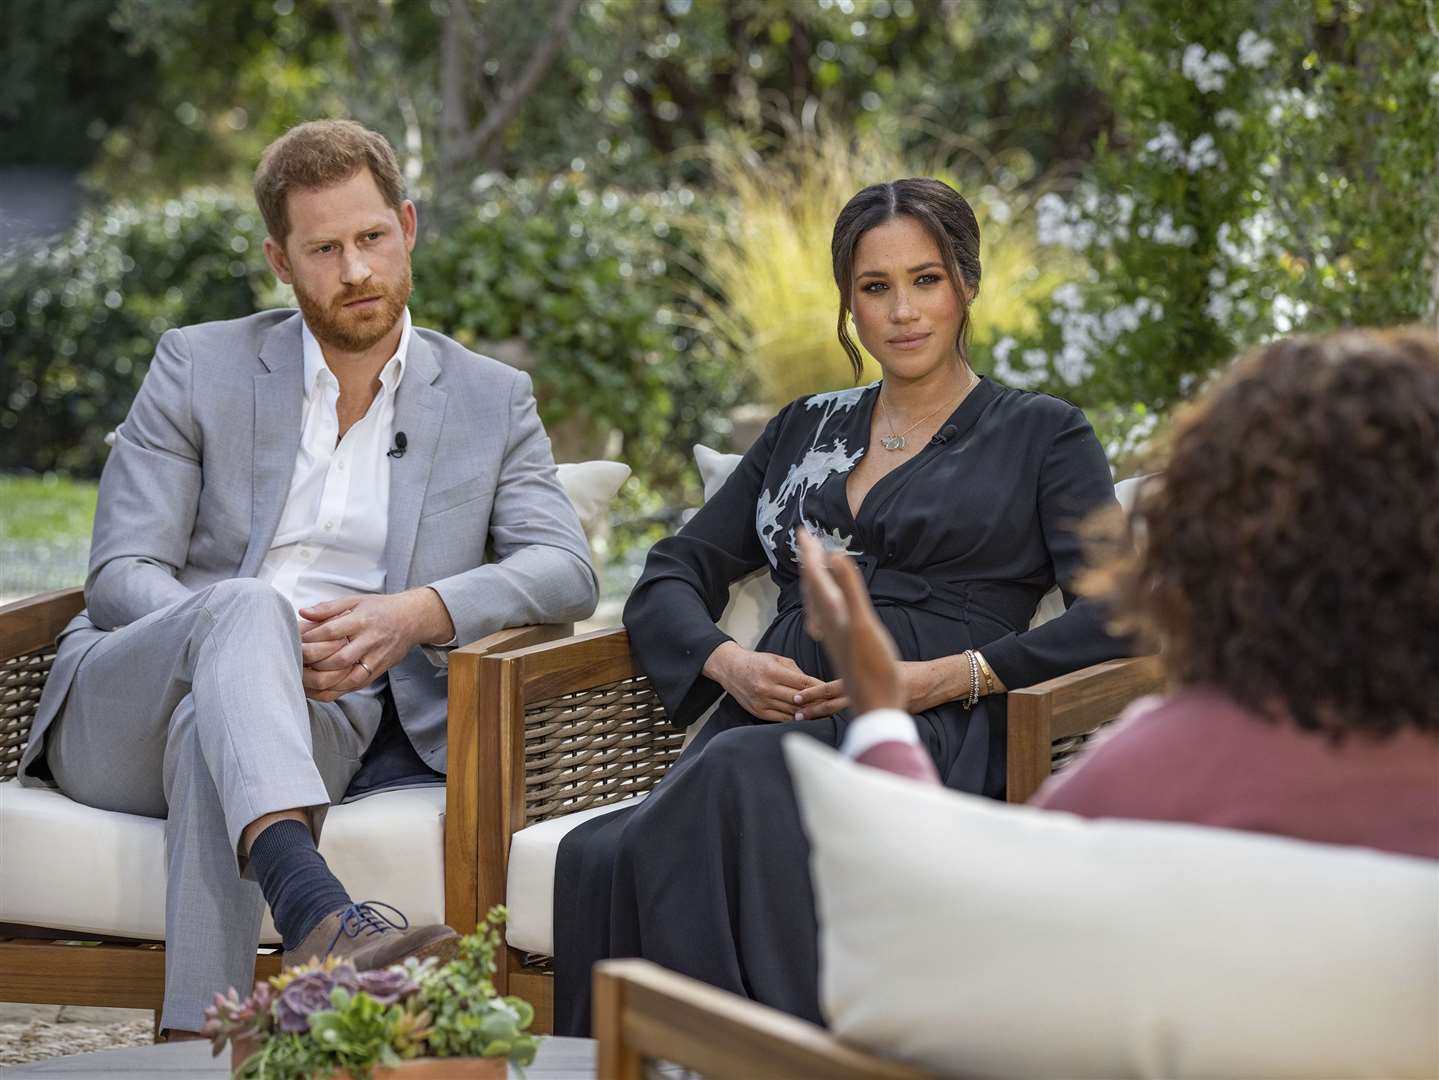 The Duke and Duchess of Sussex during their interview with Oprah Winfrey in 2021 (Joe Pugliese/Harpo Productions/PA)